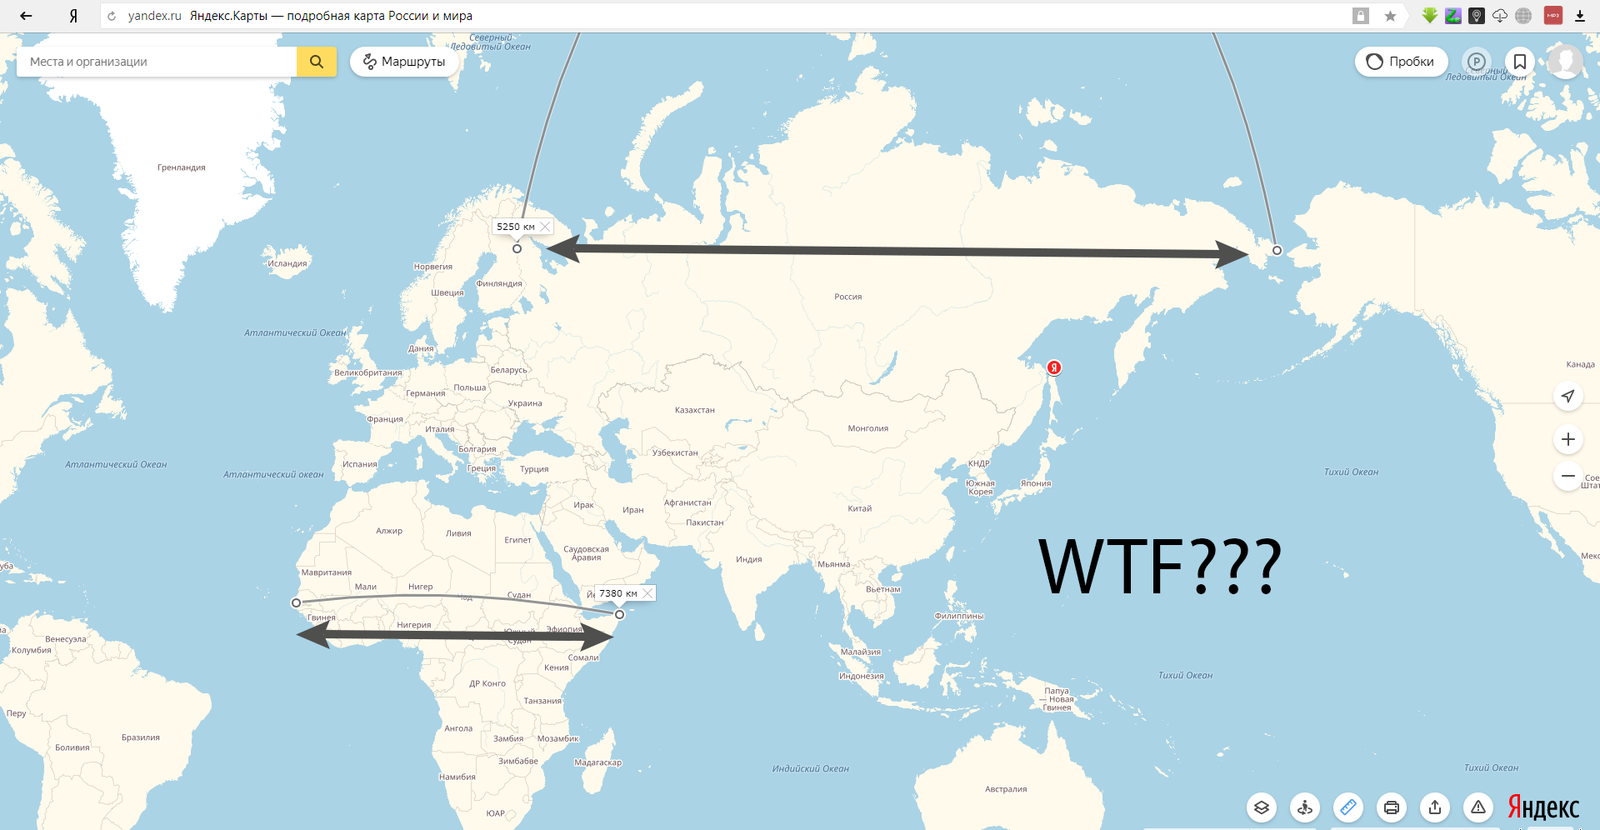 Why is Africa longer than Eurasia? - My, WTF, Eurasia, Africa, Continents